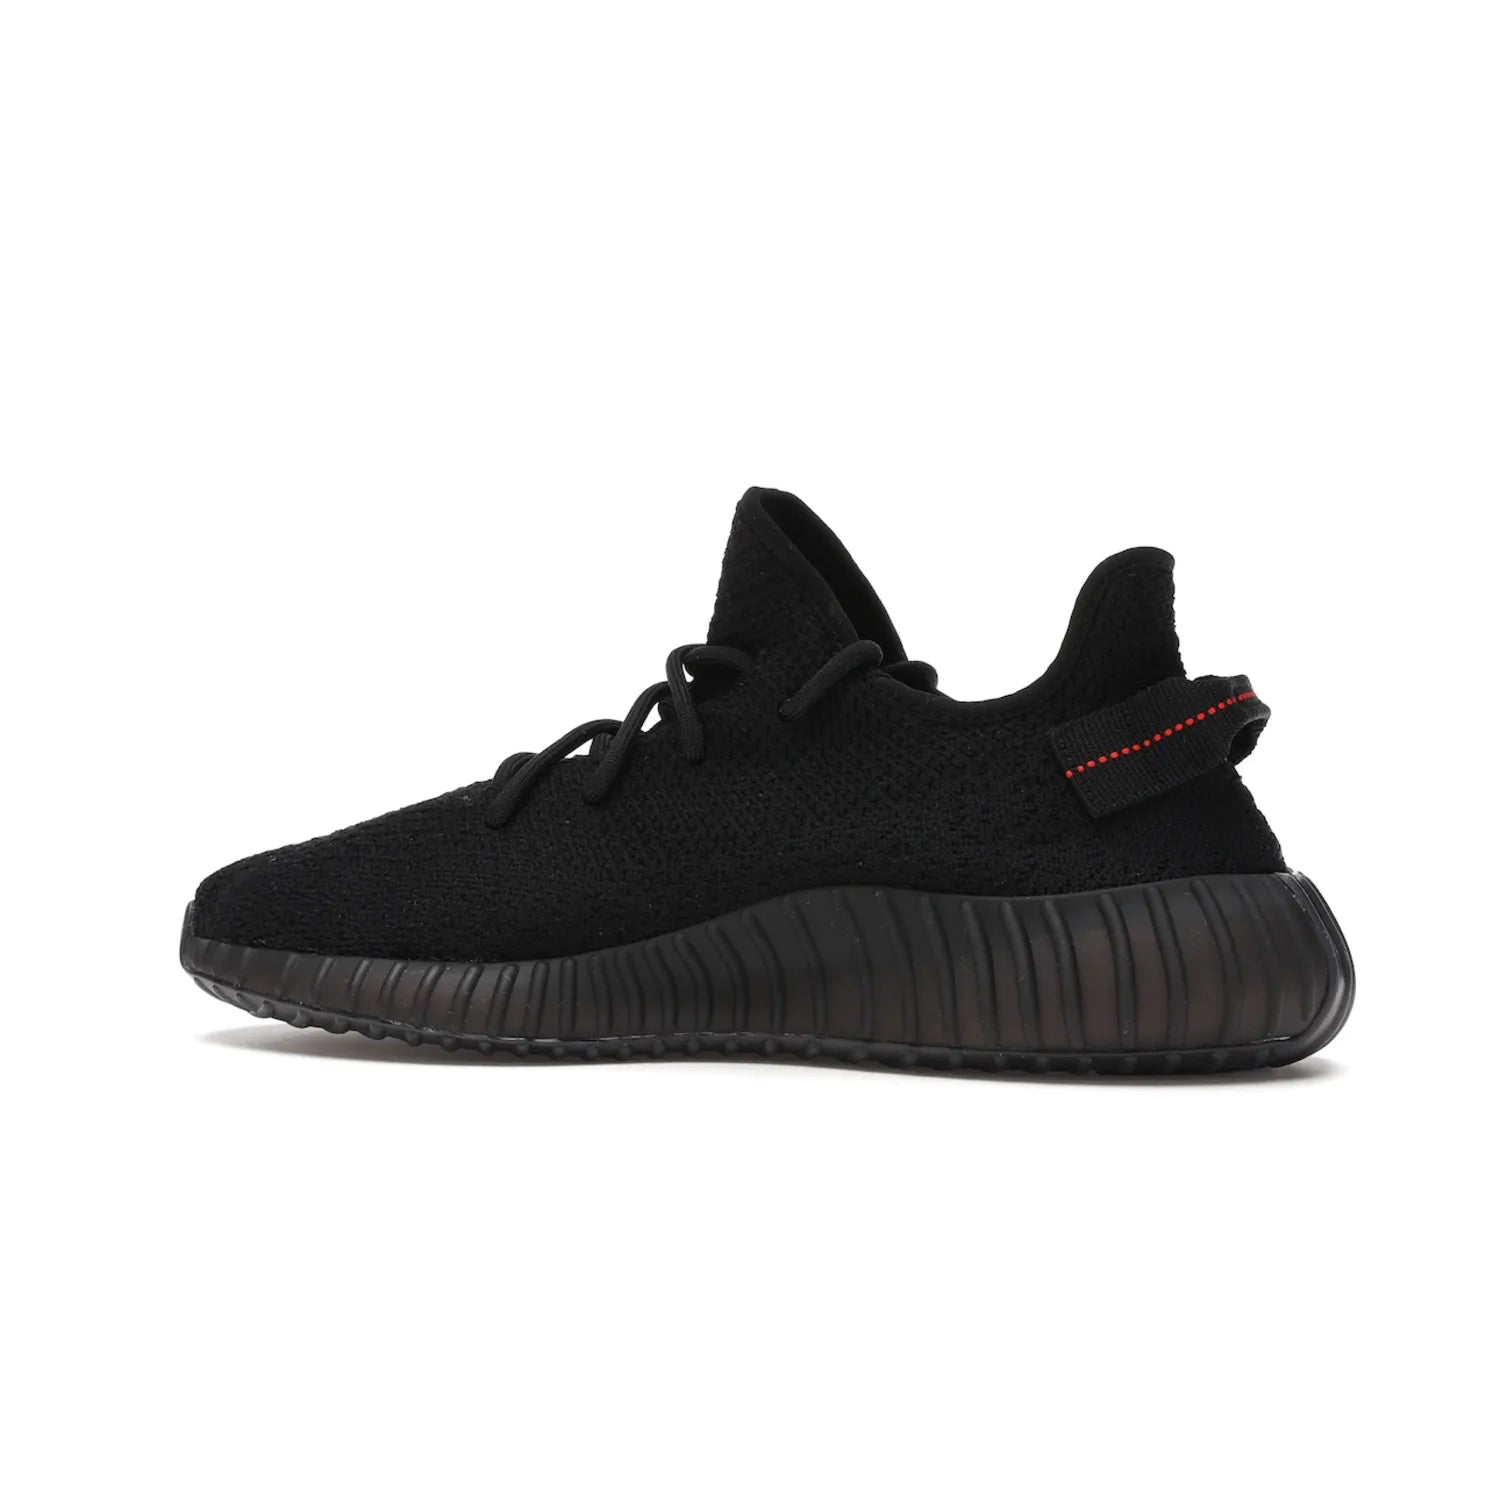 adidas Yeezy Boost 350 V2 Black Red (2017/2020) - Image 21 - Only at www.BallersClubKickz.com - Adidas Yeezy Boost 350 V2 Black Red: a classic colorway featuring black Primeknit upper, BOOST cushioning system, and iconic "SPLY-350" text. Released in 2017 for a retail price of $220.